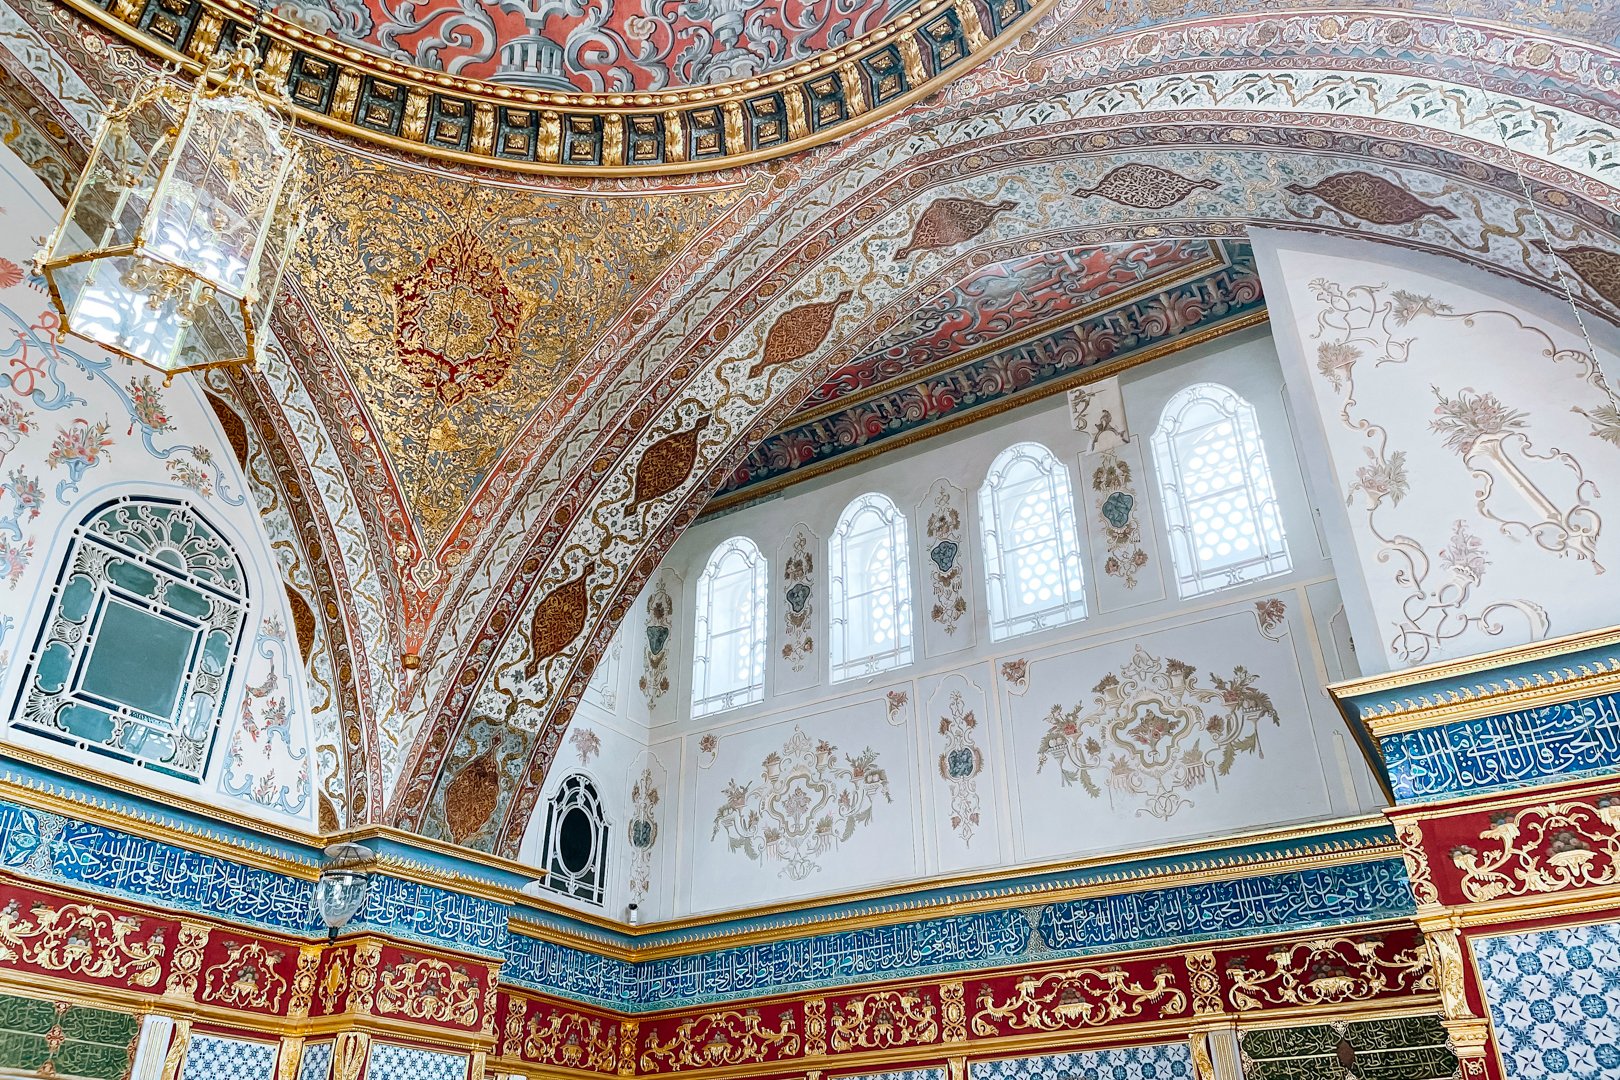 Ceiling and wall details inside of the Topkapi Palace in Istanbul